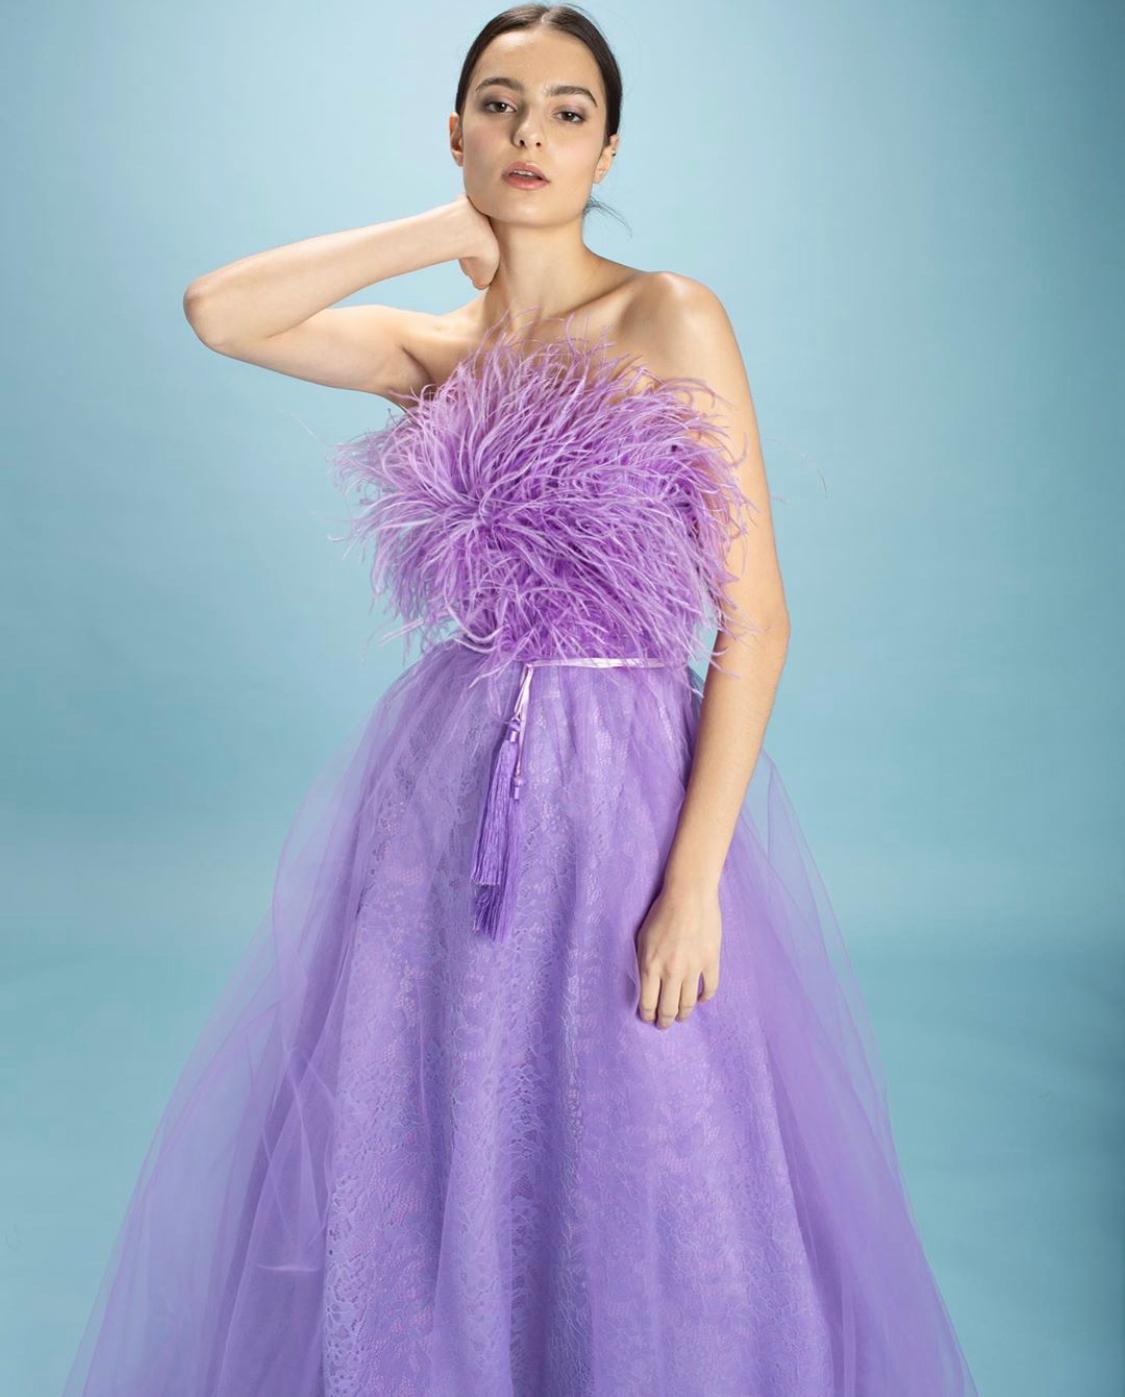 Purple A-Line dress wit no sleeves and feathers